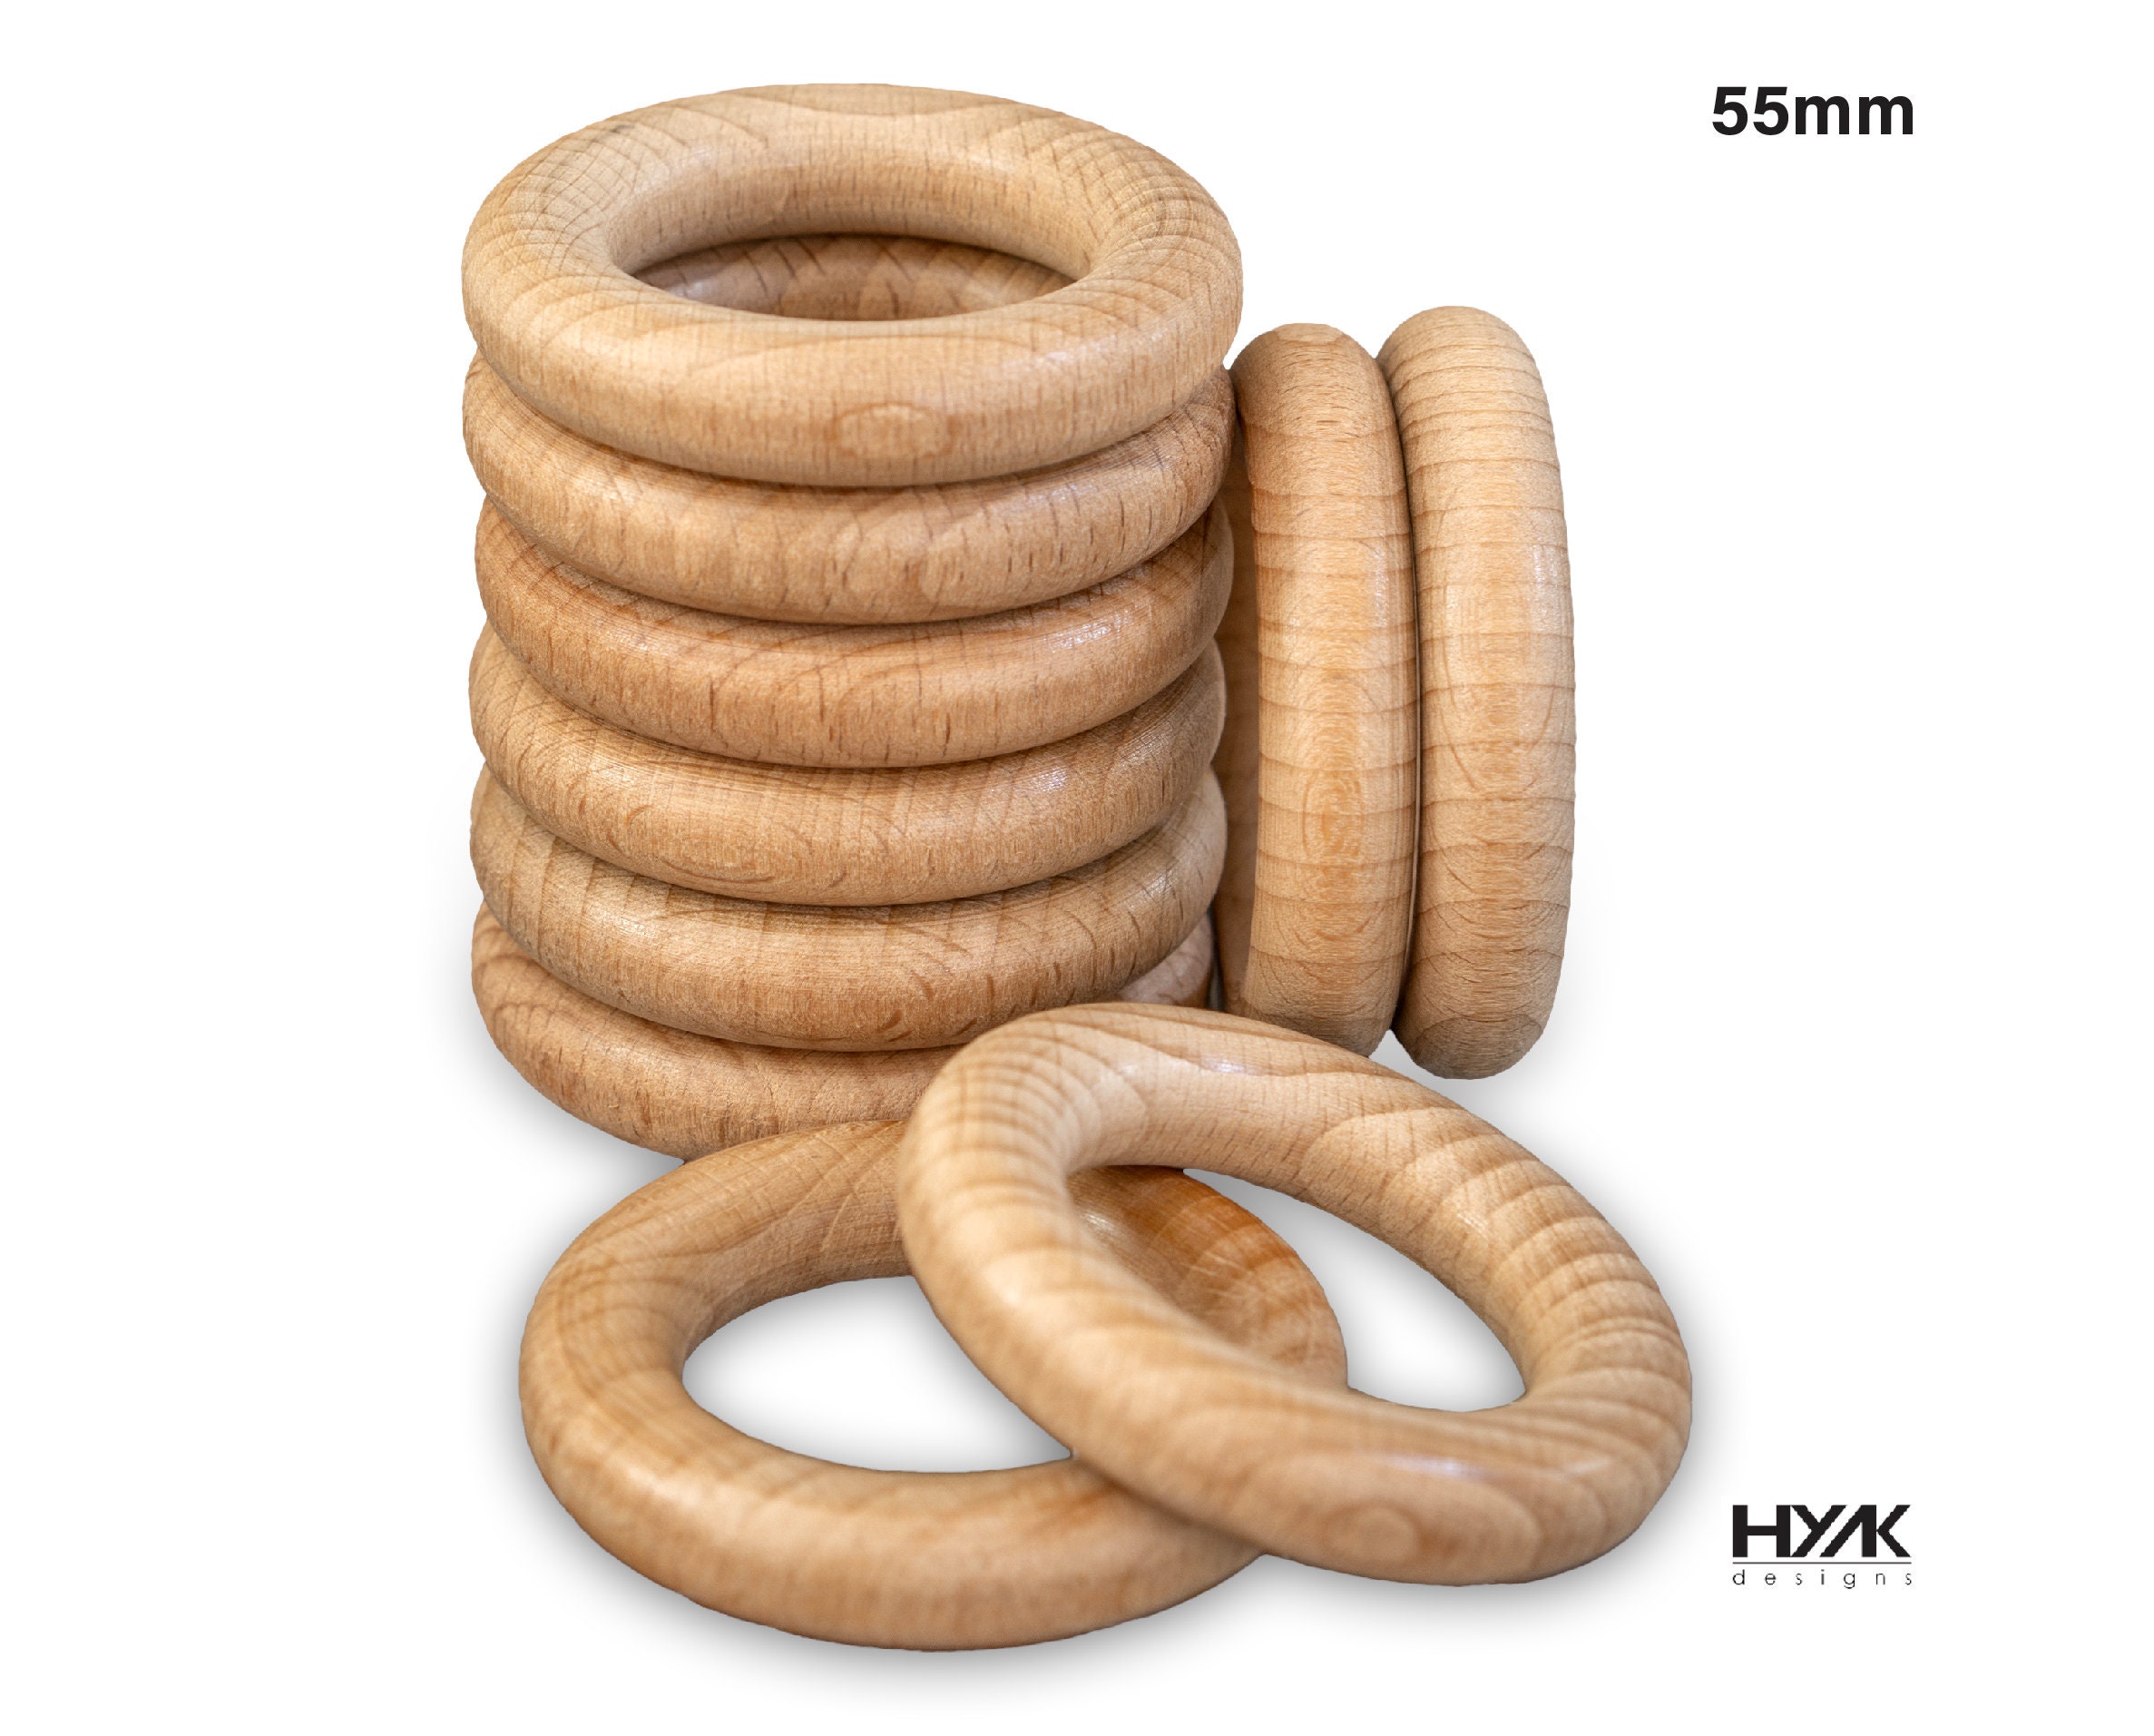 30 Pcs Wooden Rings for Craft, 55mm/2.2inch, Natural Wood Rings for Macrame  Pendant Connectors,Jewelry Making, Decor DIY Craft